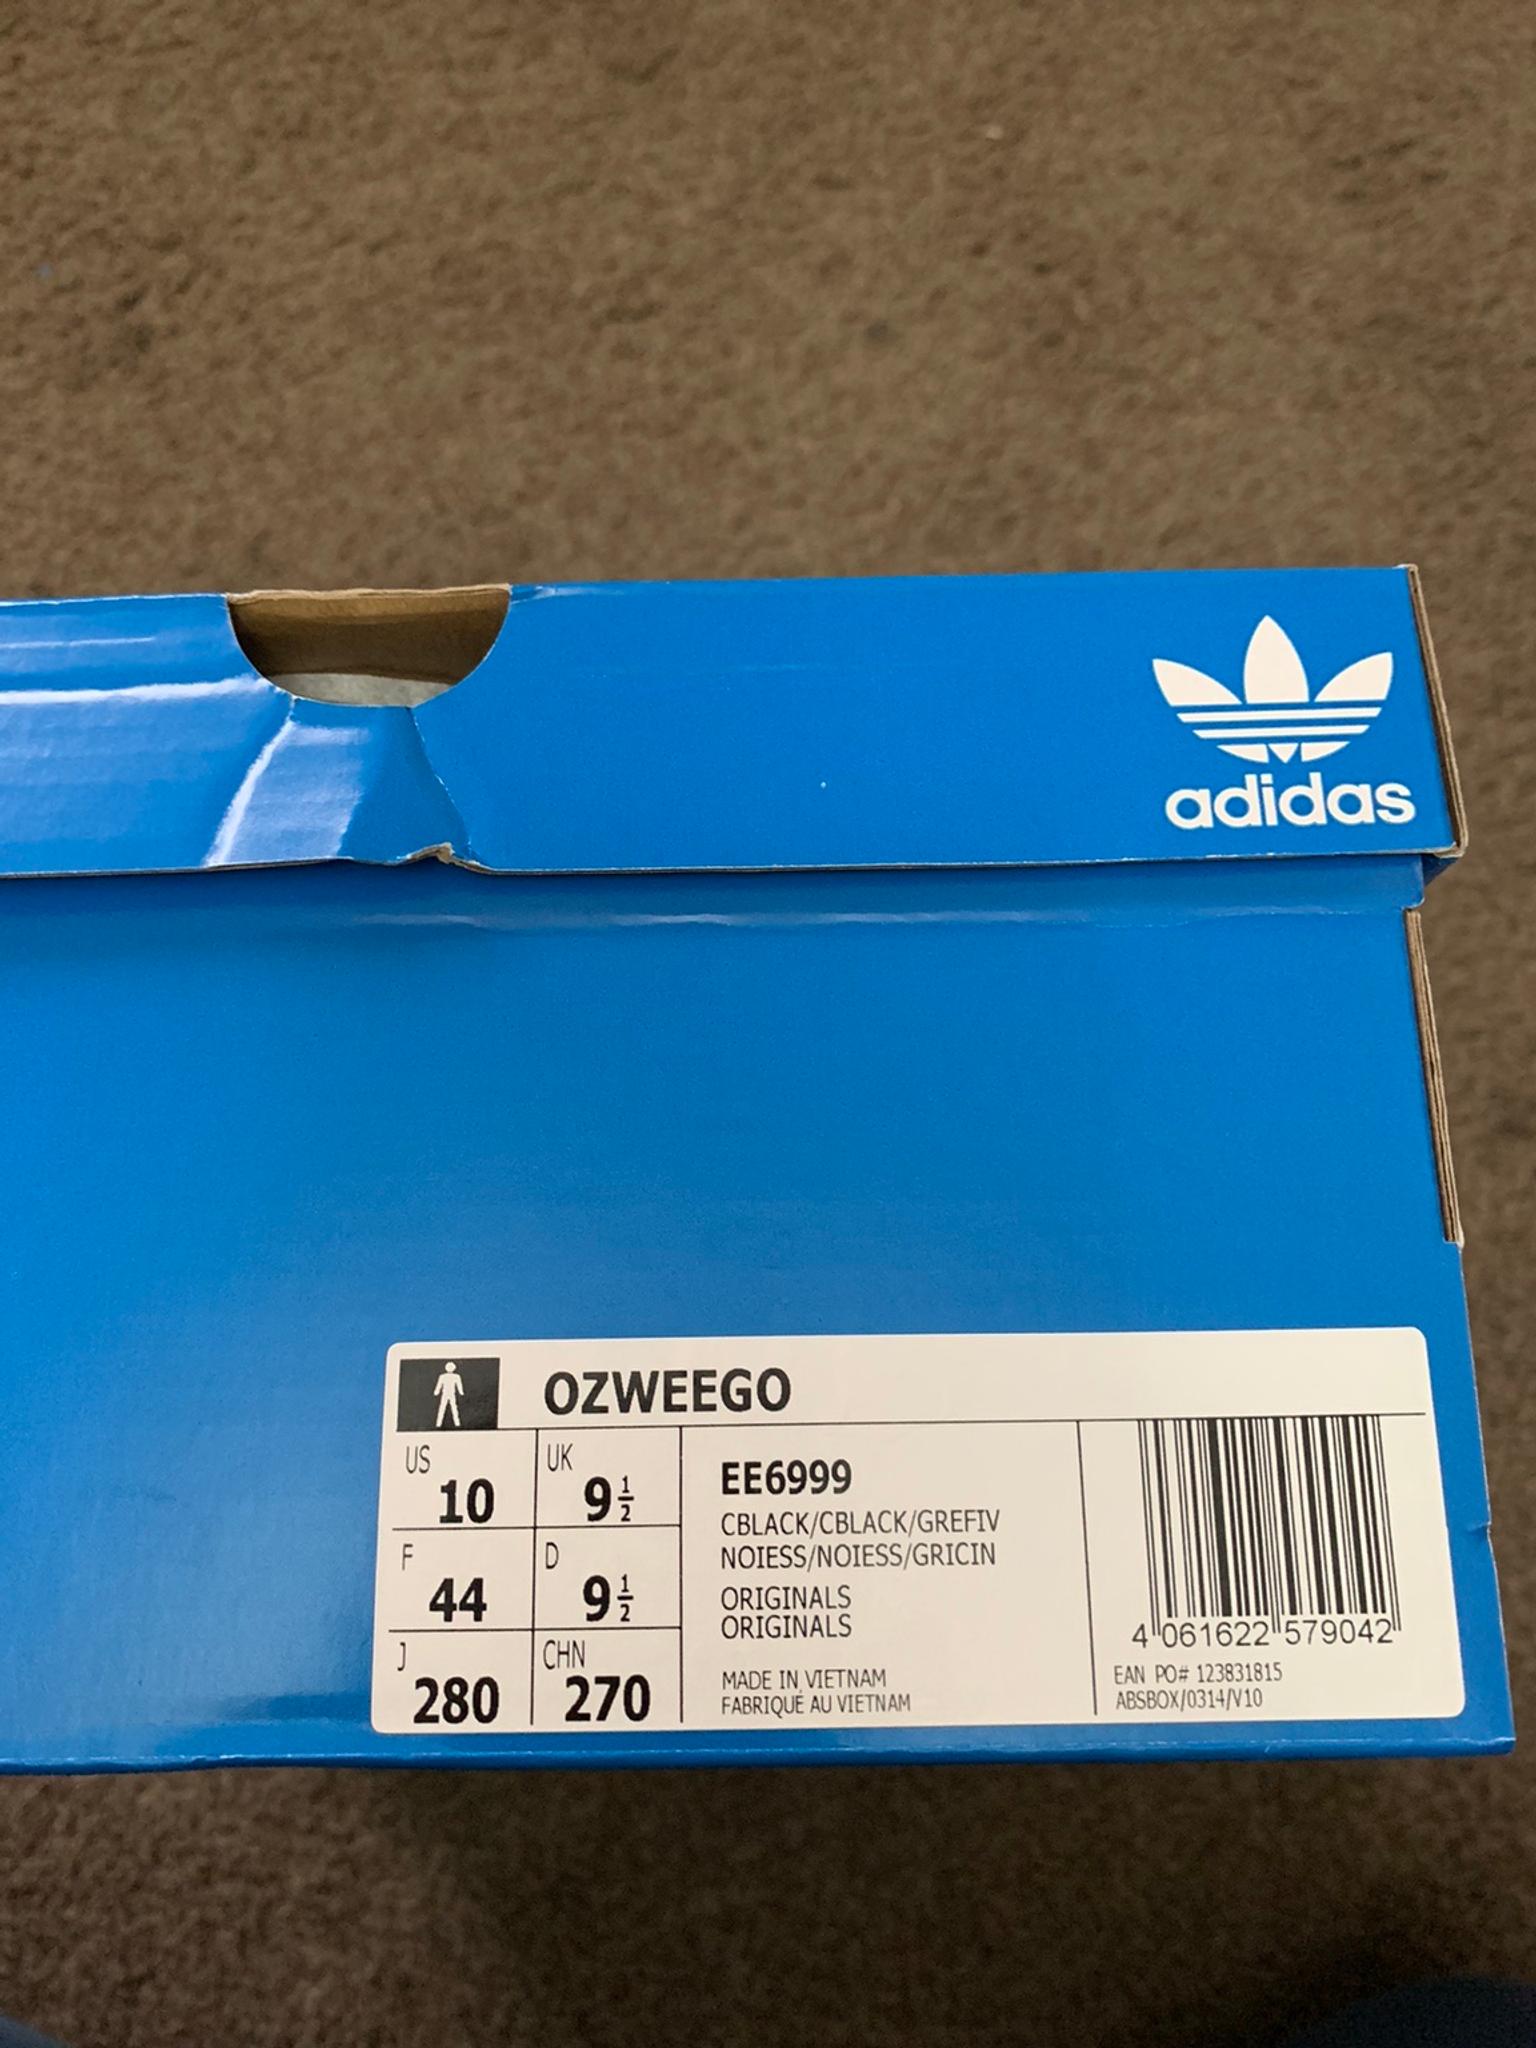 Adidas ozweego men's trainers UK size 9.5 in London Borough of Barking and  Dagenham for £120.00 for sale | Shpock